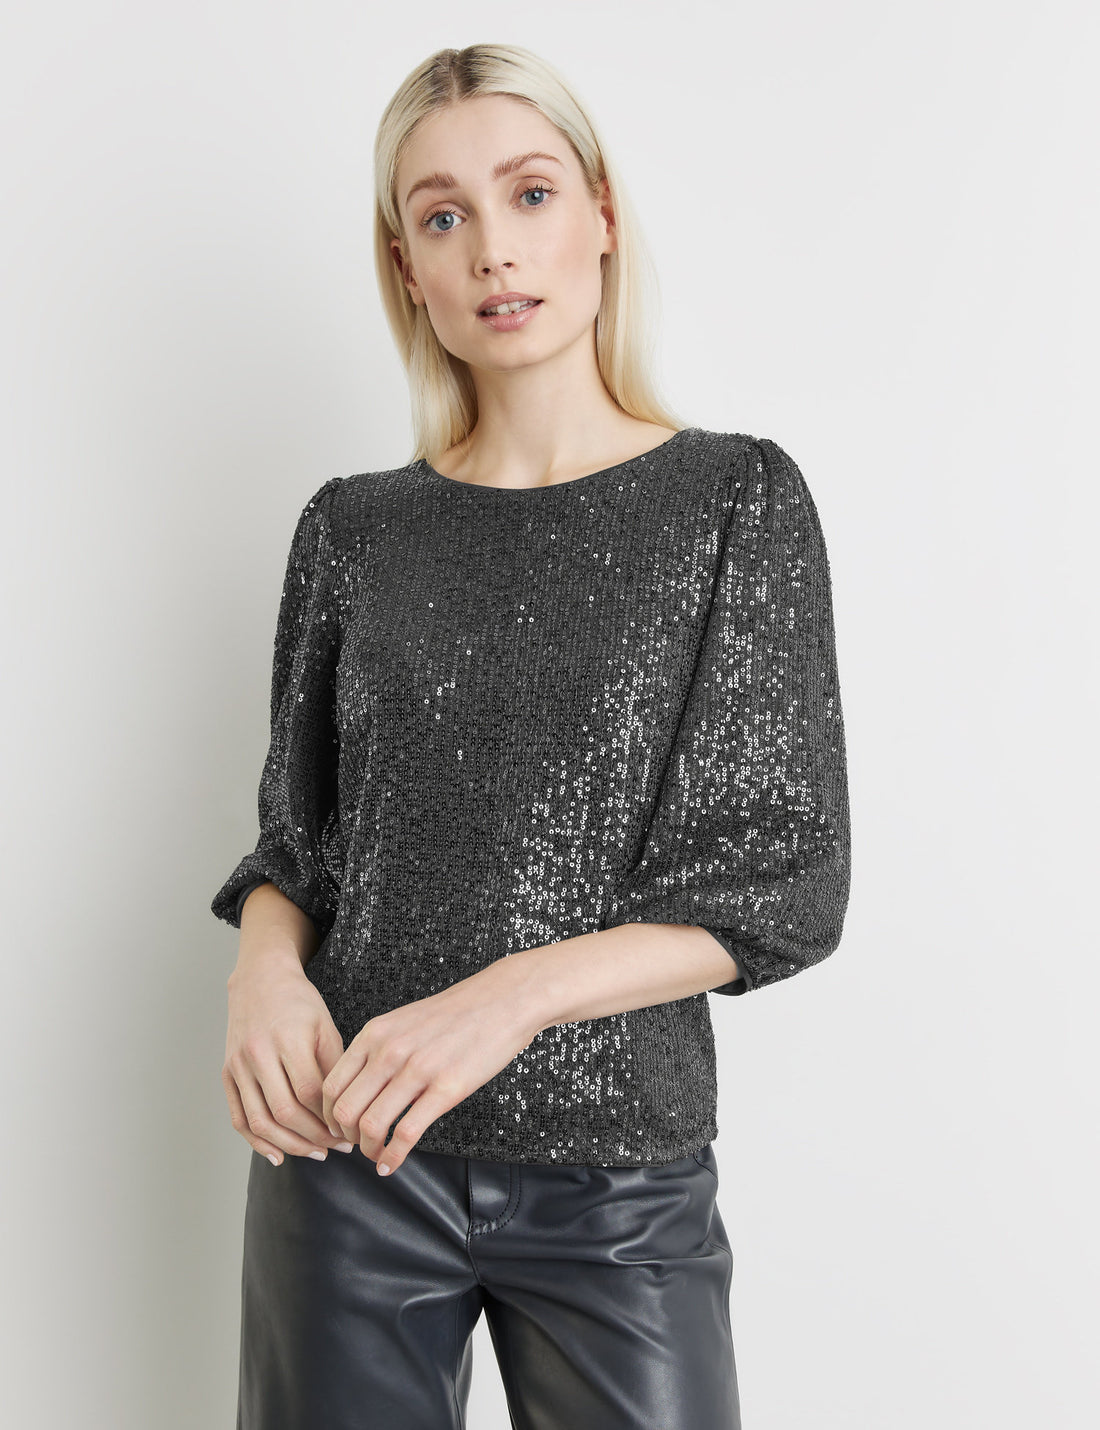 Blouse Top With All-Over Sequins_571314-16106_2270_01